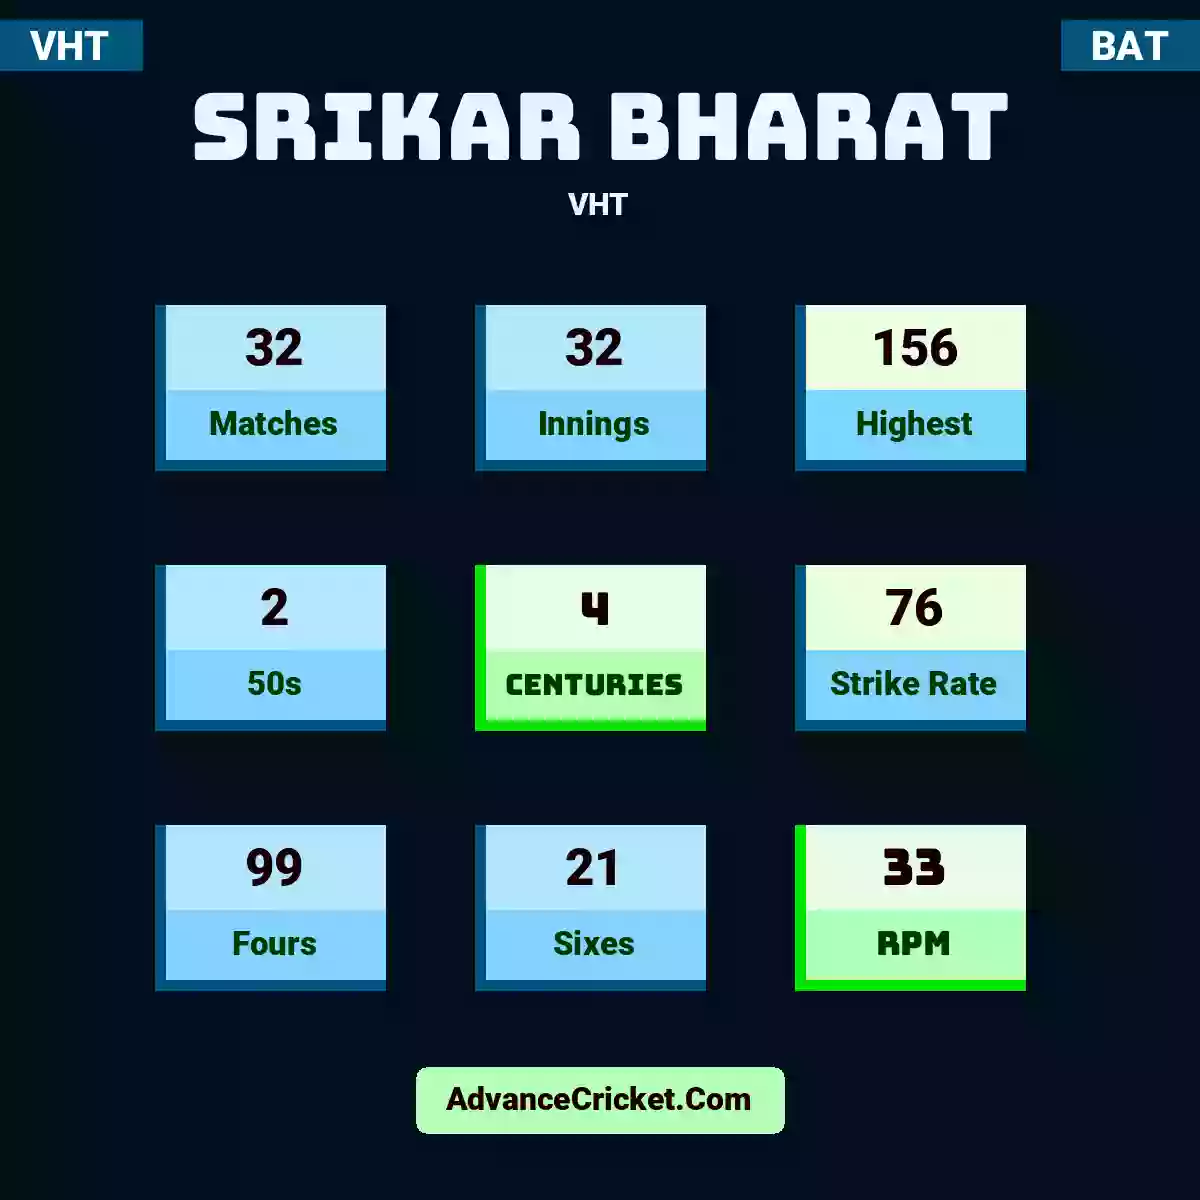 Srikar Bharat VHT , Srikar Bharat played 32 matches, scored 156 runs as highest, 2 half-centuries, and 4 centuries, with a strike rate of 76. S.Bharat hit 99 fours and 21 sixes, with an RPM of 33.